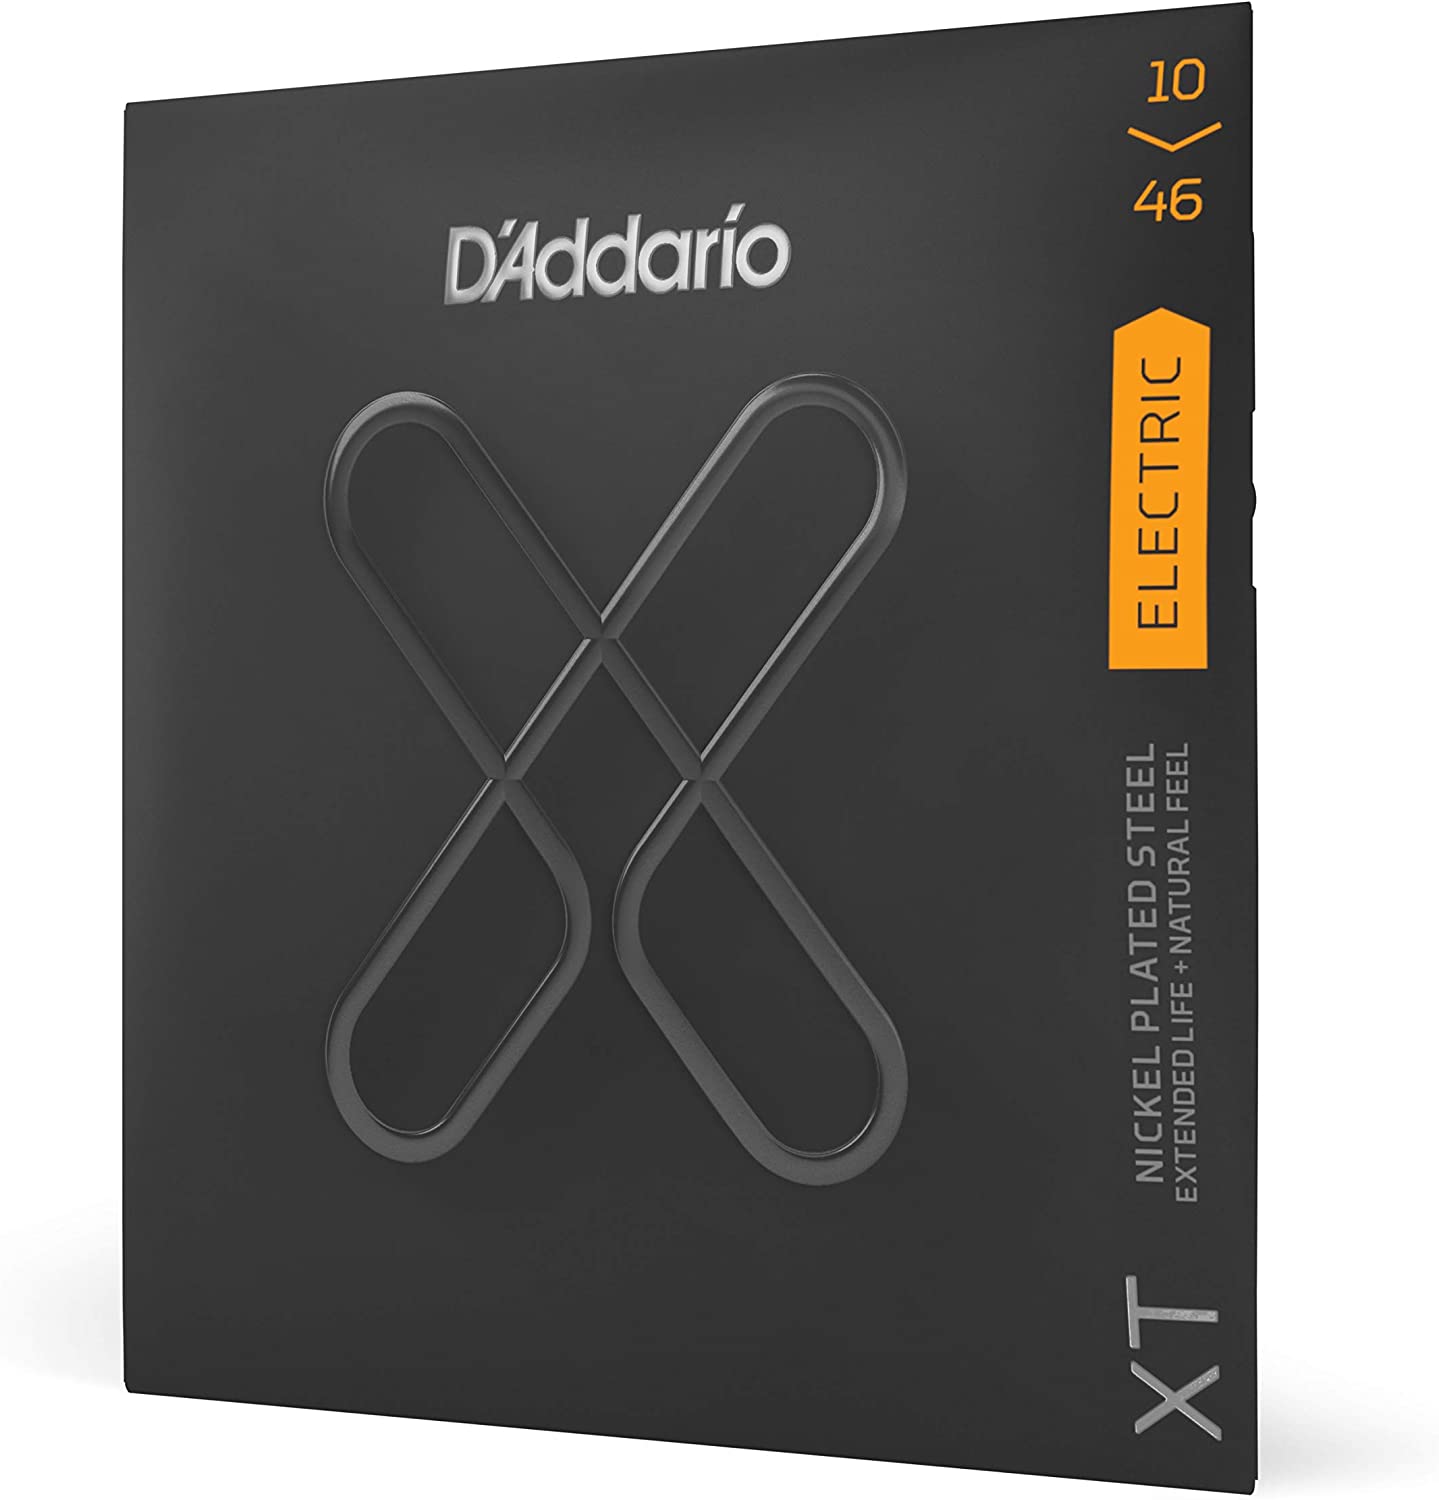 D'Addario XT Nickel Coated Electric Guitar Strings on a white background